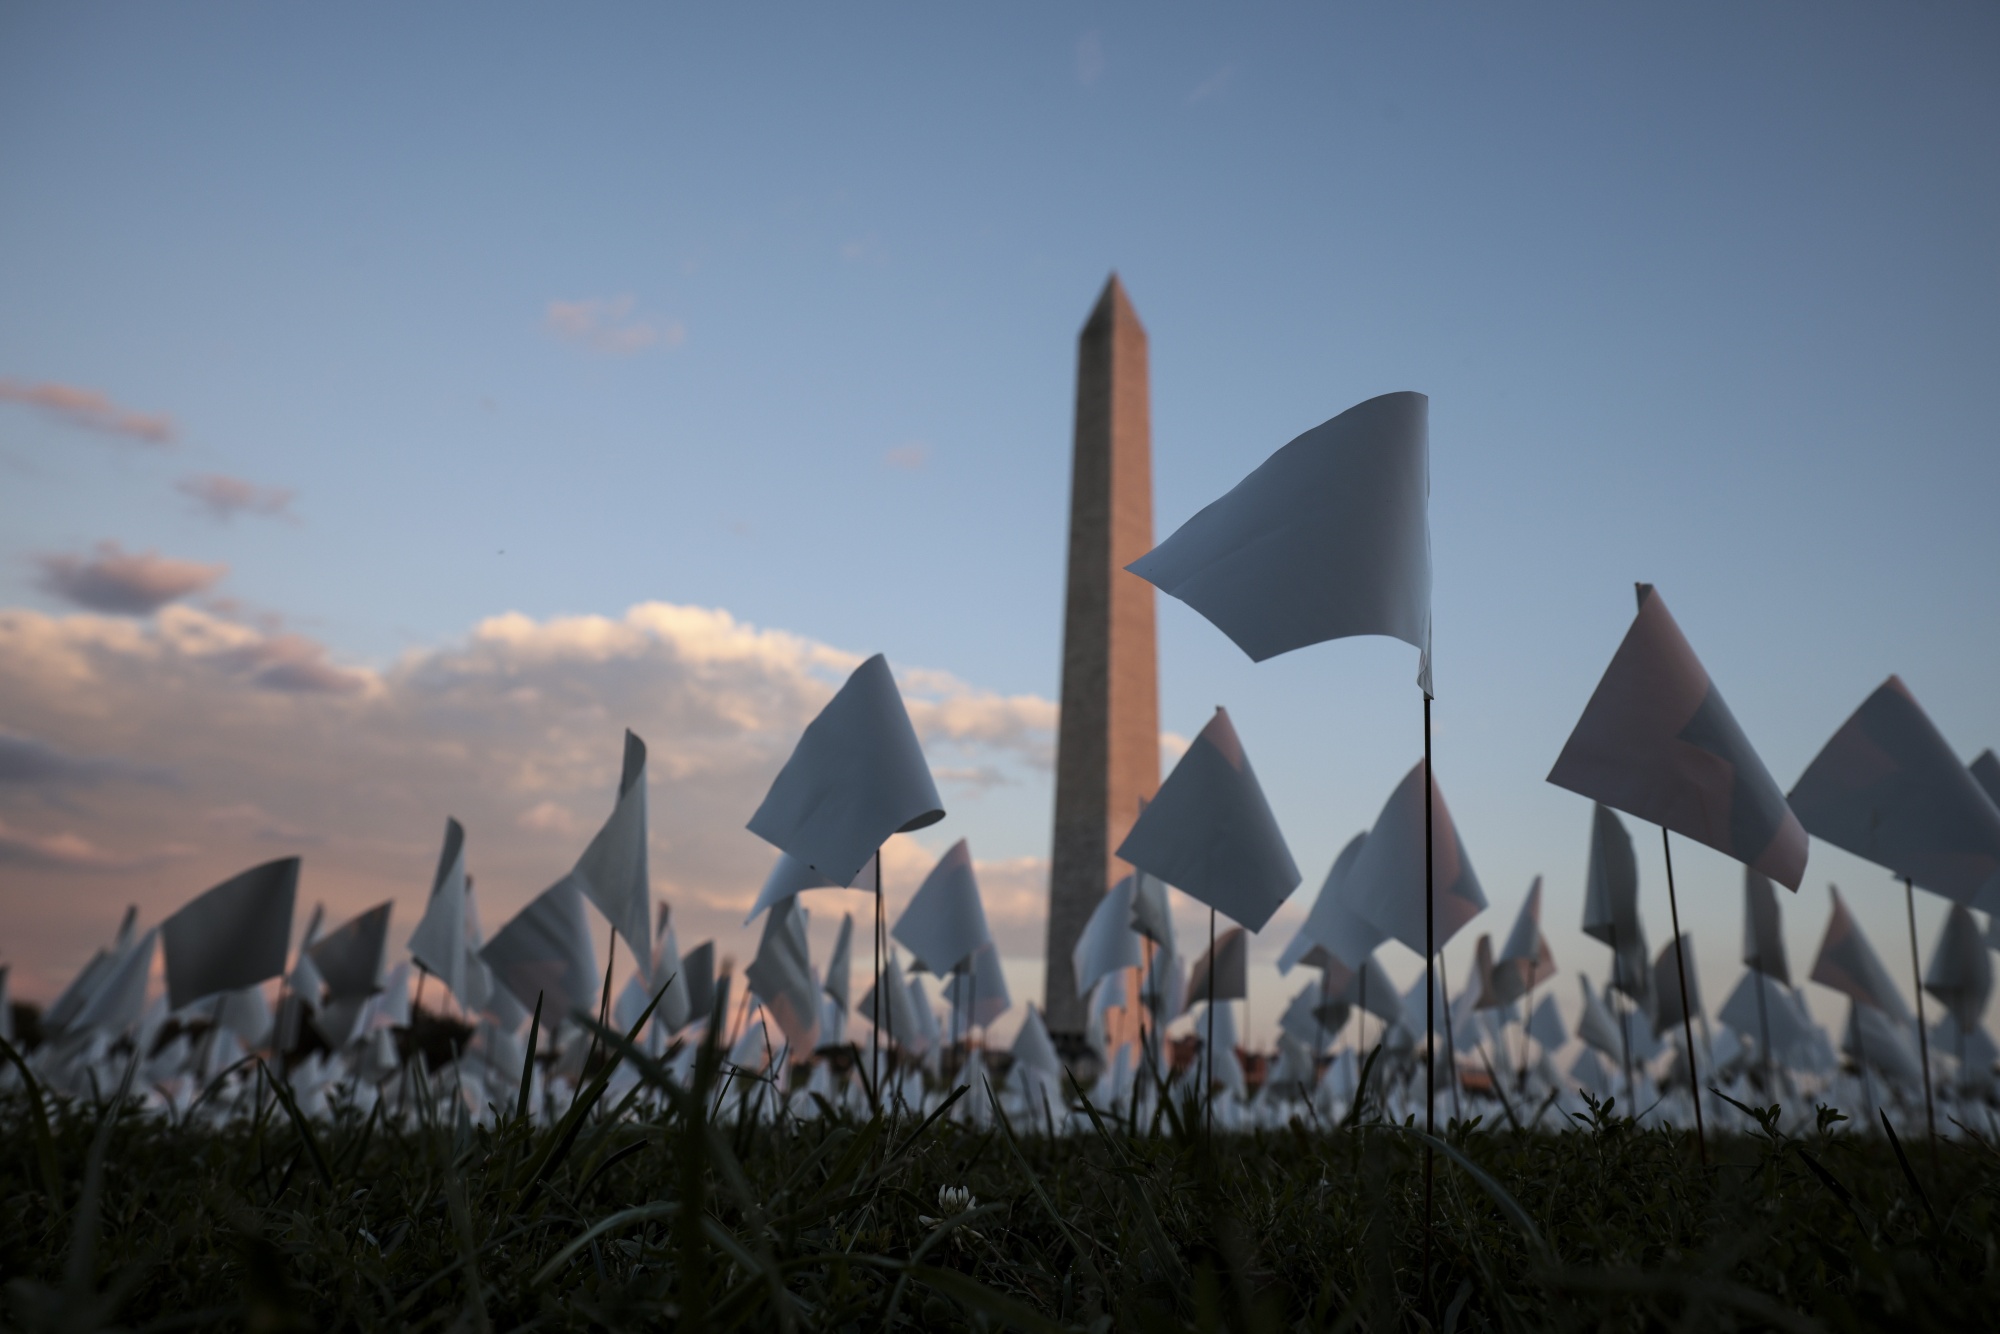 The “In America: Remember”&nbsp;public art installation in Washington, D.C., commemorated&nbsp;Americans who have died due to Covid-19. The installation,&nbsp;a concept by artist Suzanne Brennan Firstenberg,&nbsp;featured more than 650,000 small plastic flags&nbsp;planted in 20 acres of the National Mall.&nbsp;